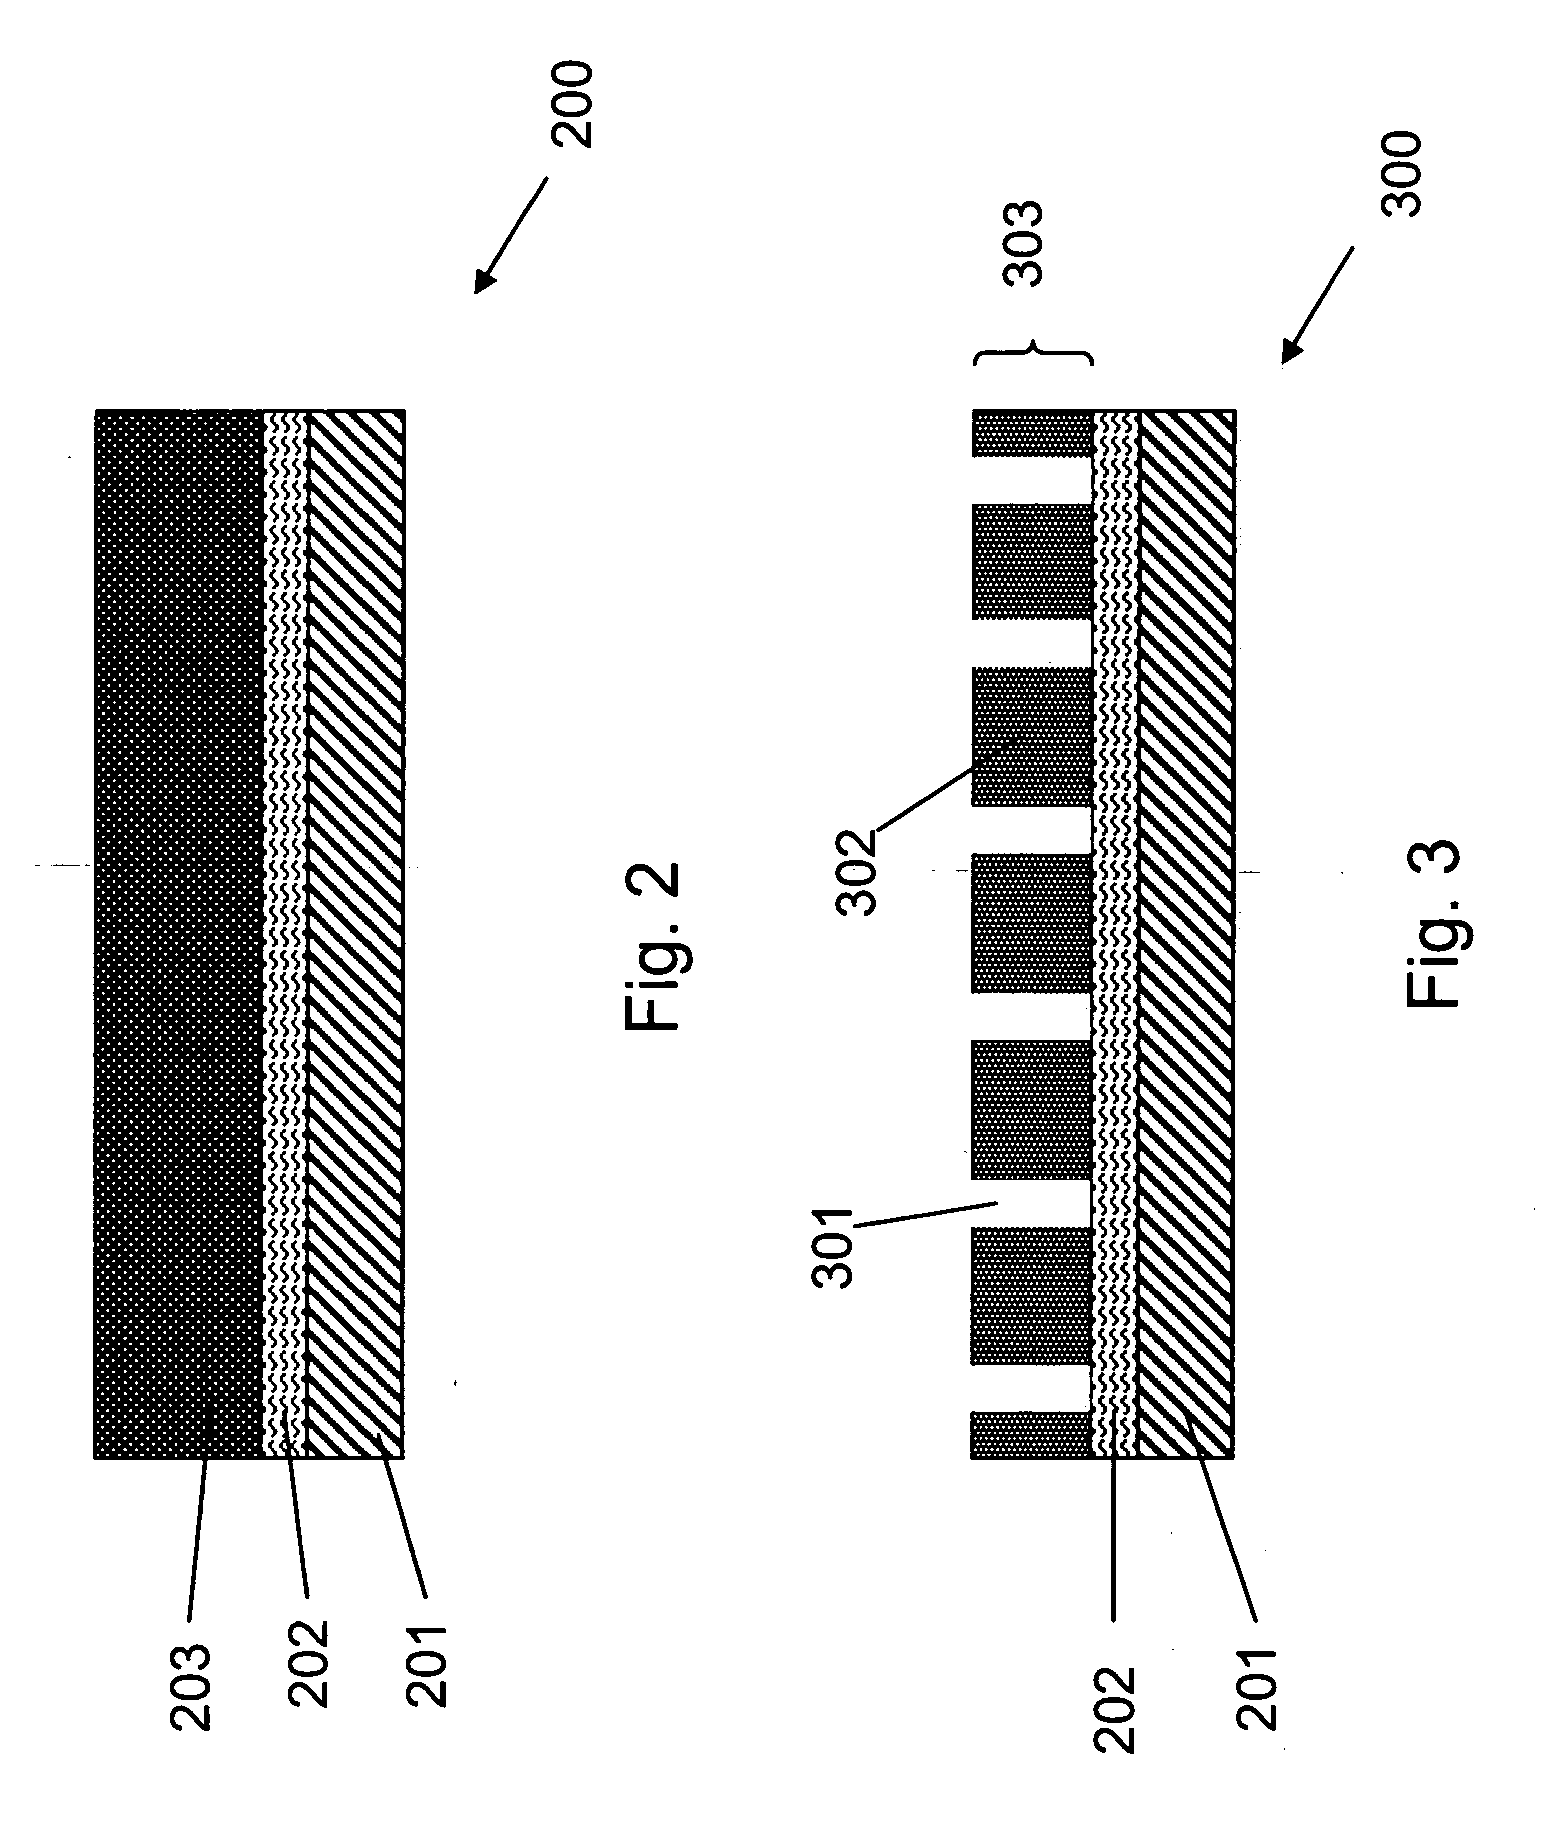 Gated nanorod field emitter structures and associated methods of fabrication